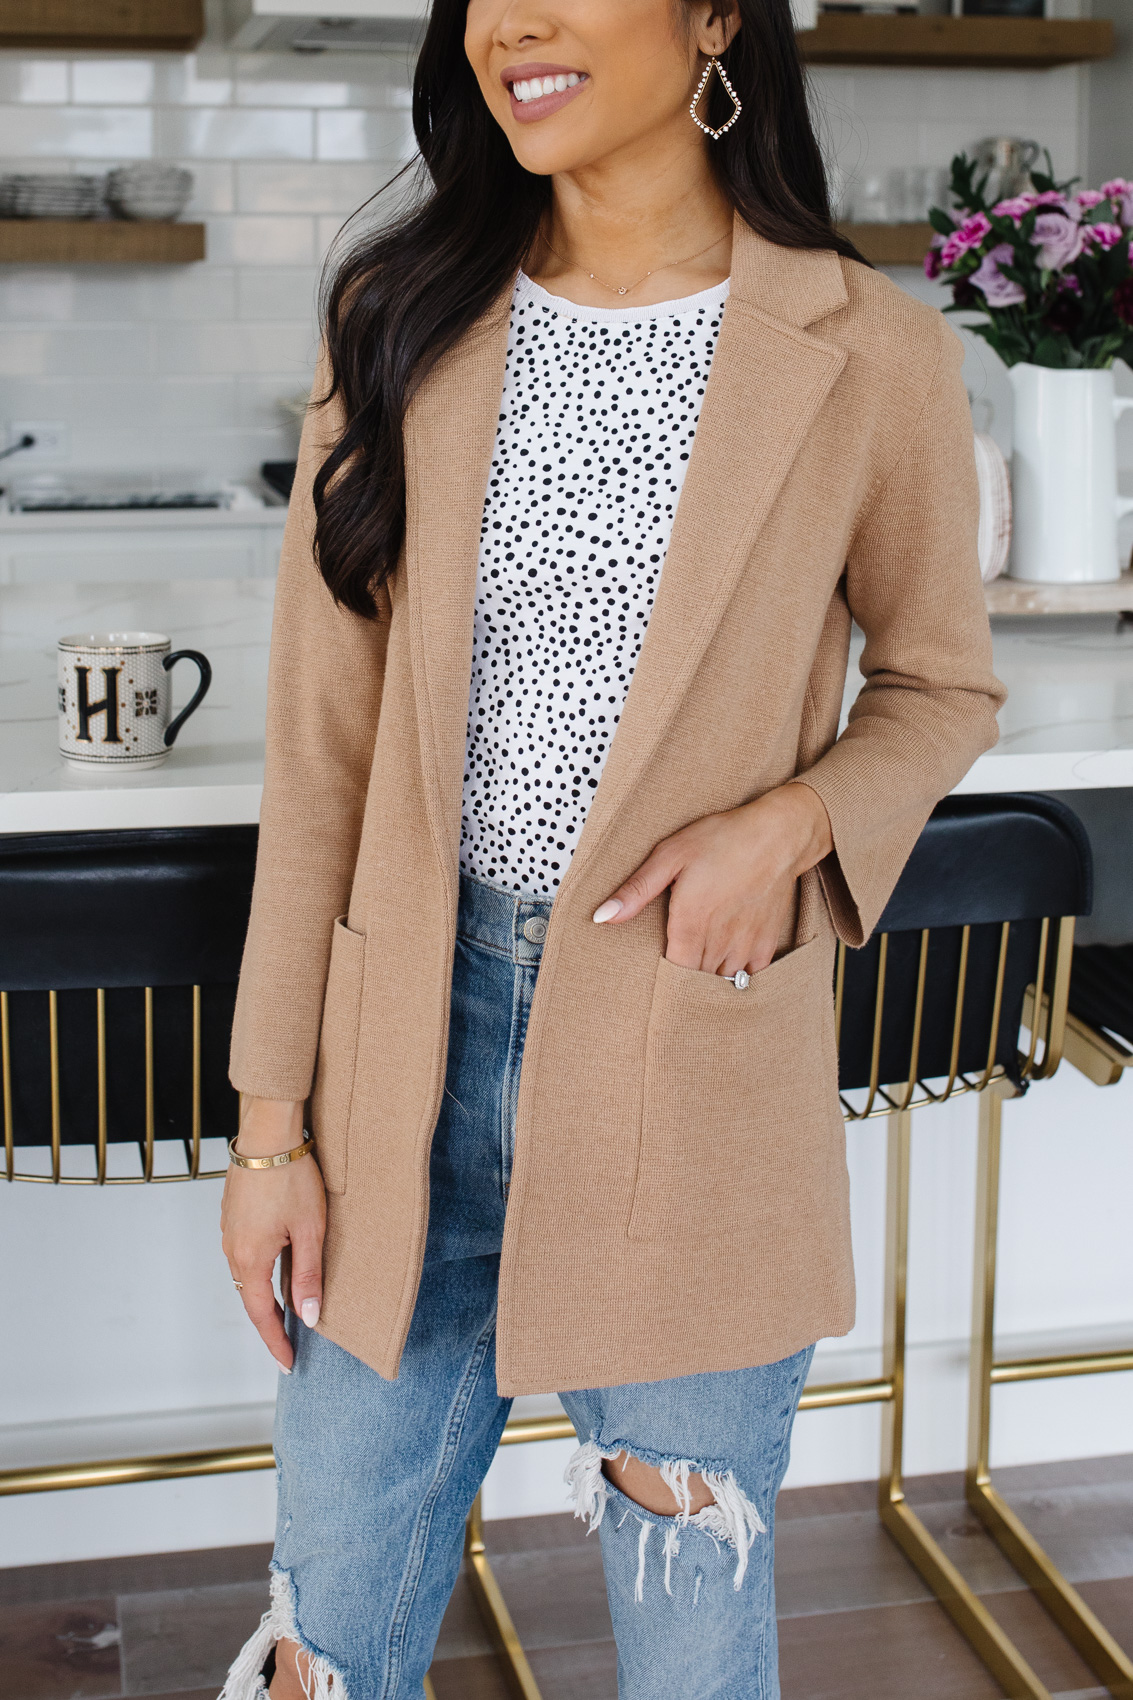 Blogger Hoang-Kim styles the J.Crew Sophie blazer, which is like a coatigan for casual fall outfits